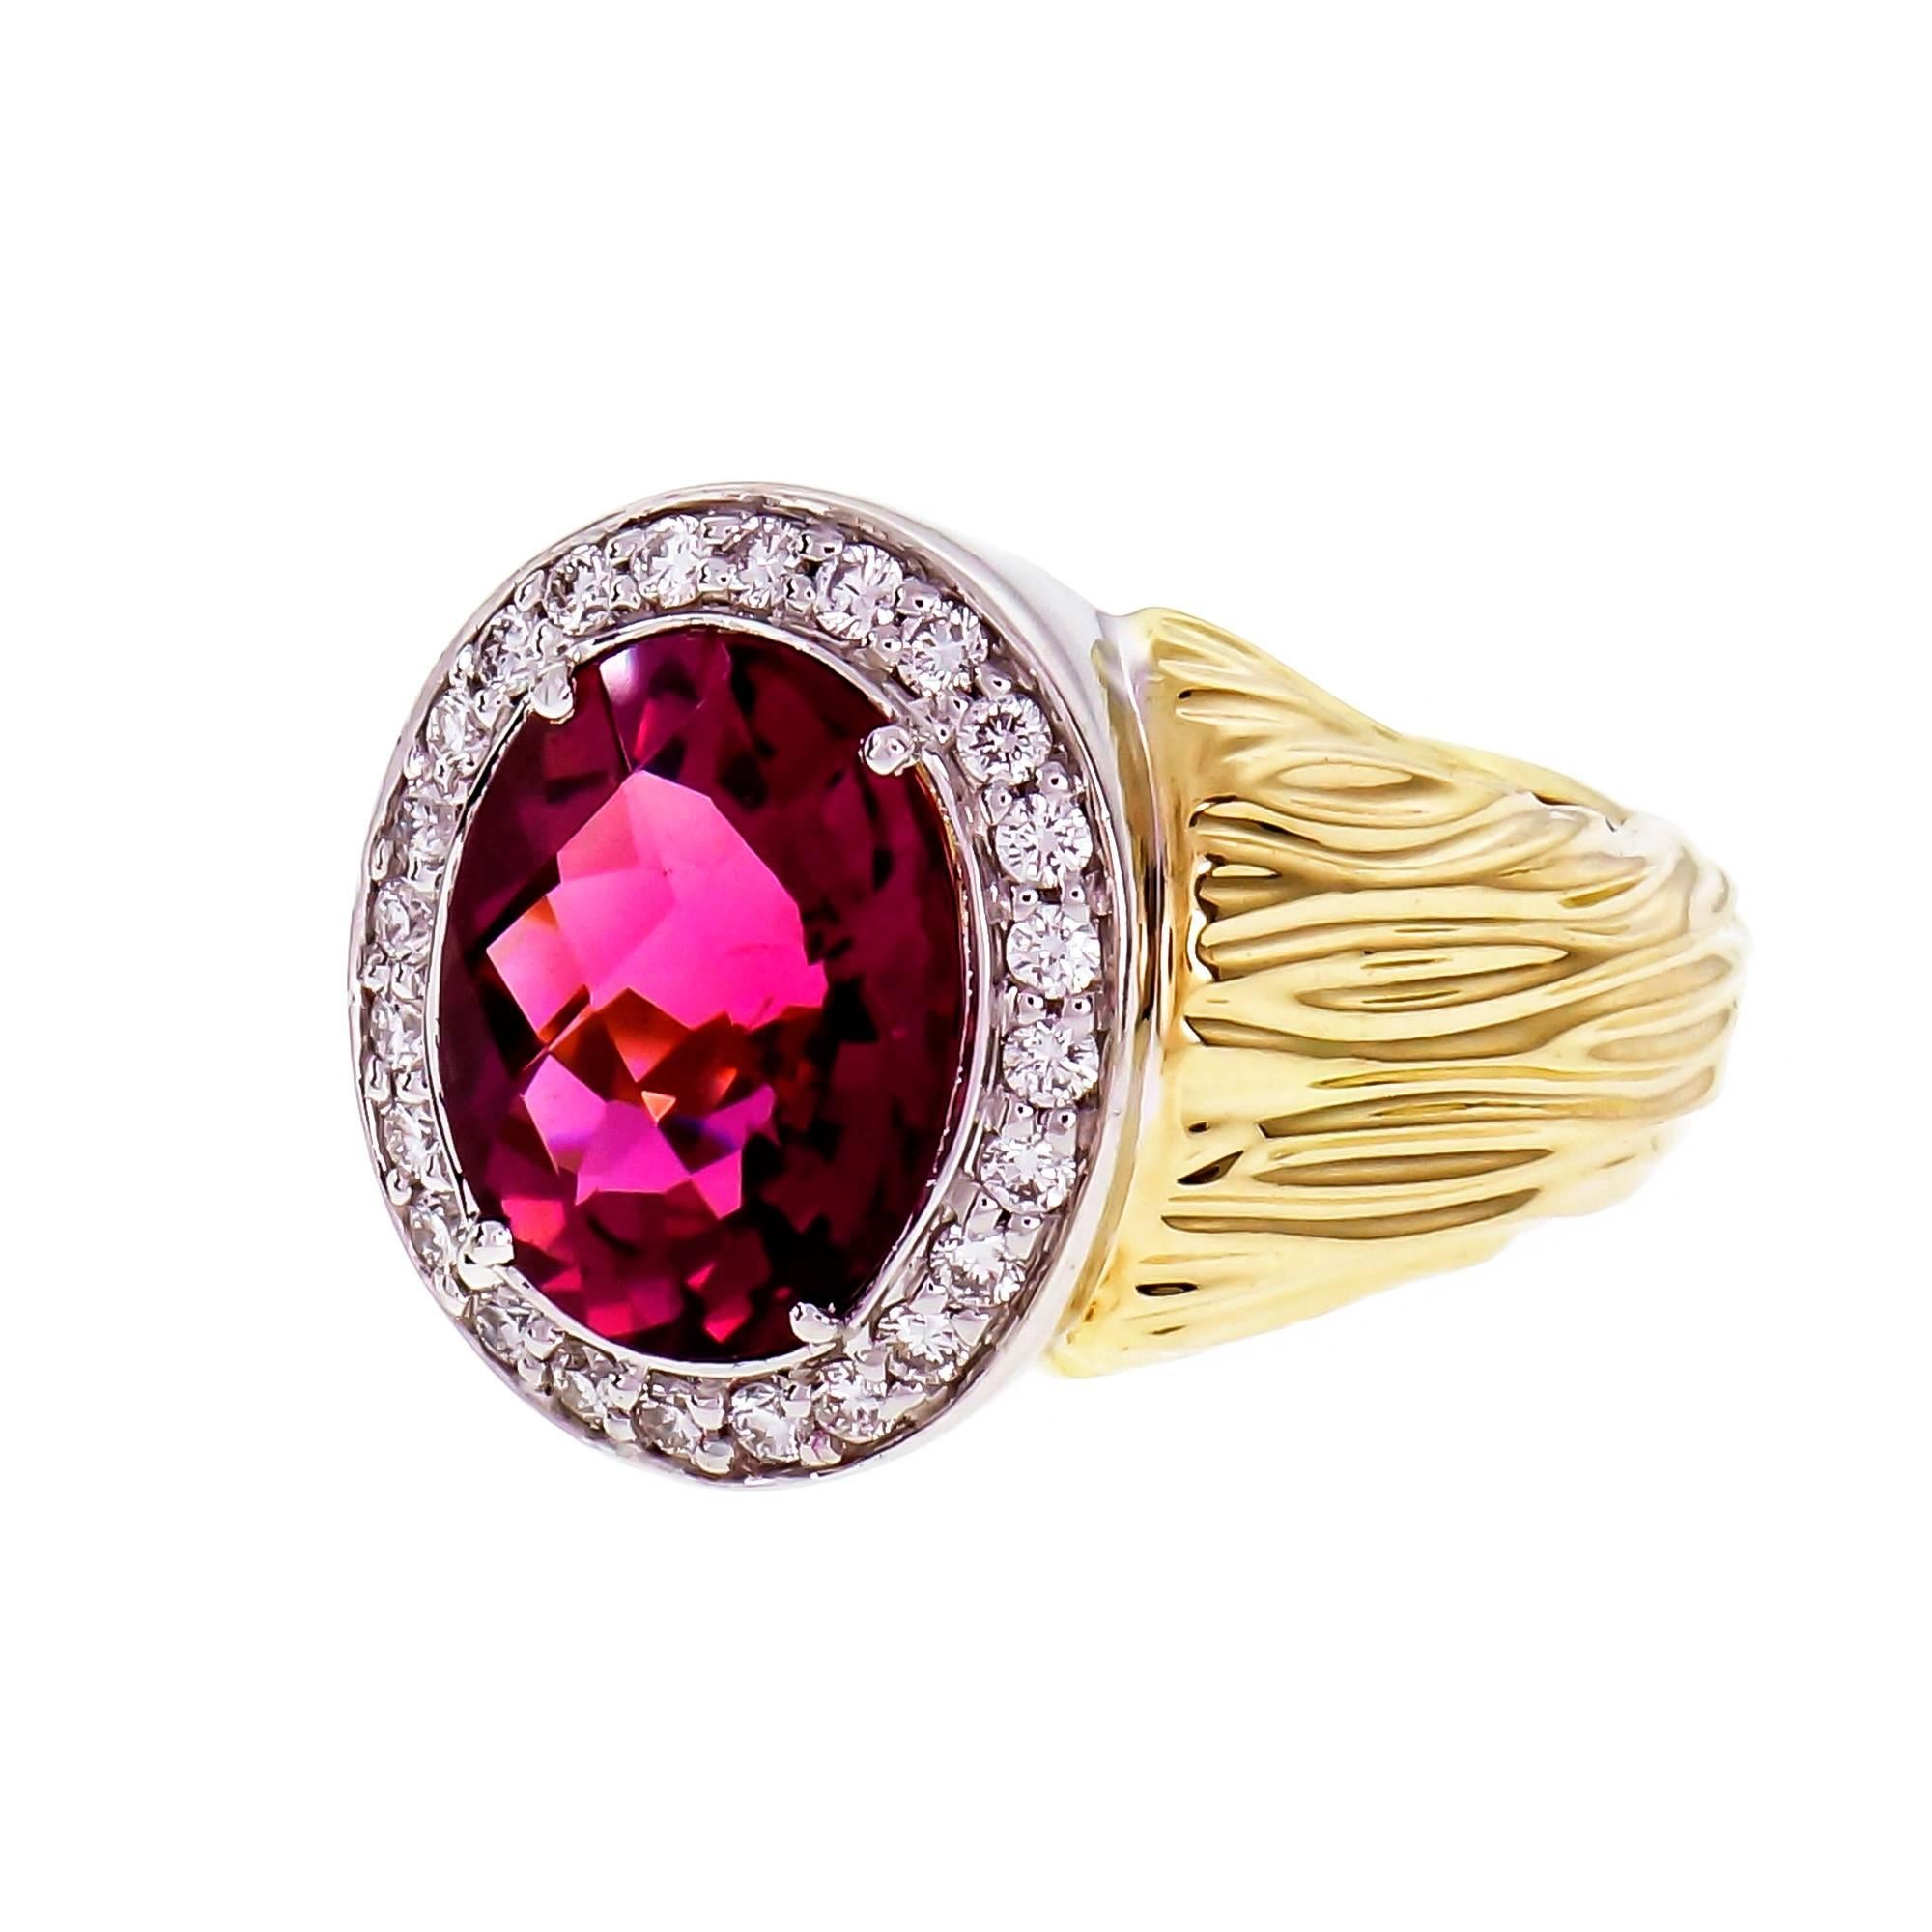 Pink Tourmaline and Diamond Cocktail Ring. 18k yellow and white gold oval Tourmaline faceted with a halo of Diamonds. The hallmark is no longer visible, only and S can be seen. 

18k 2-tone gold
1 oval pink Tourmaline, approx. total weight 3.54cts,